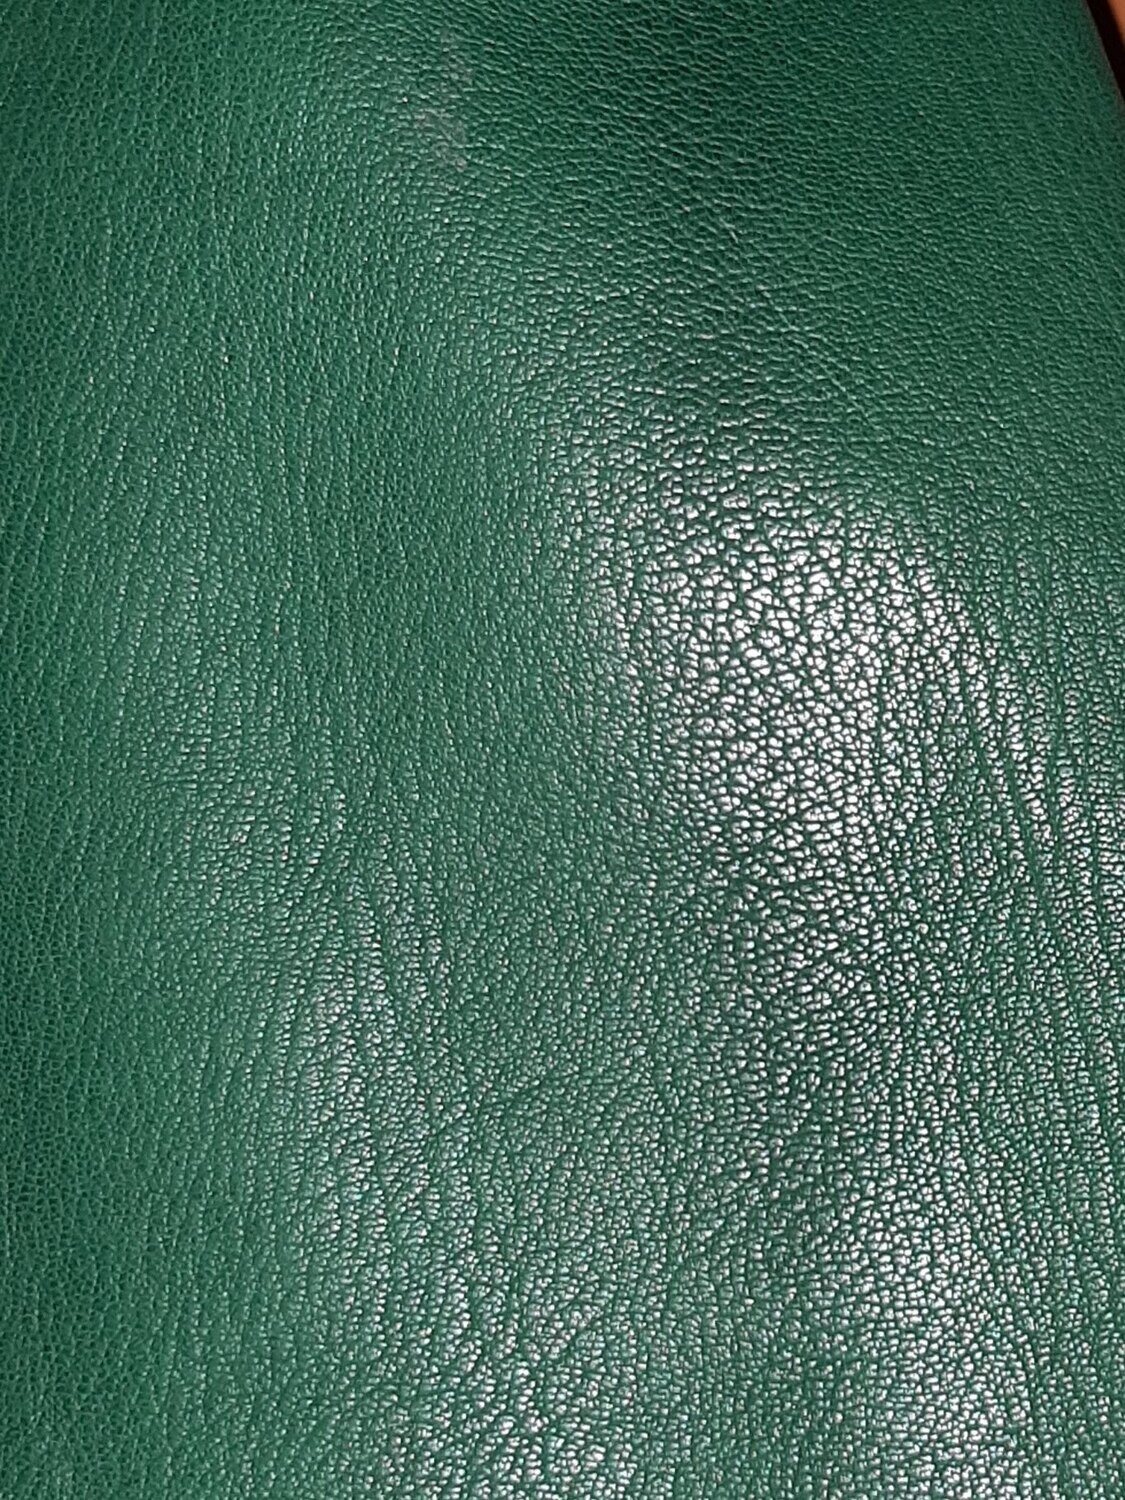 Leather goat color green